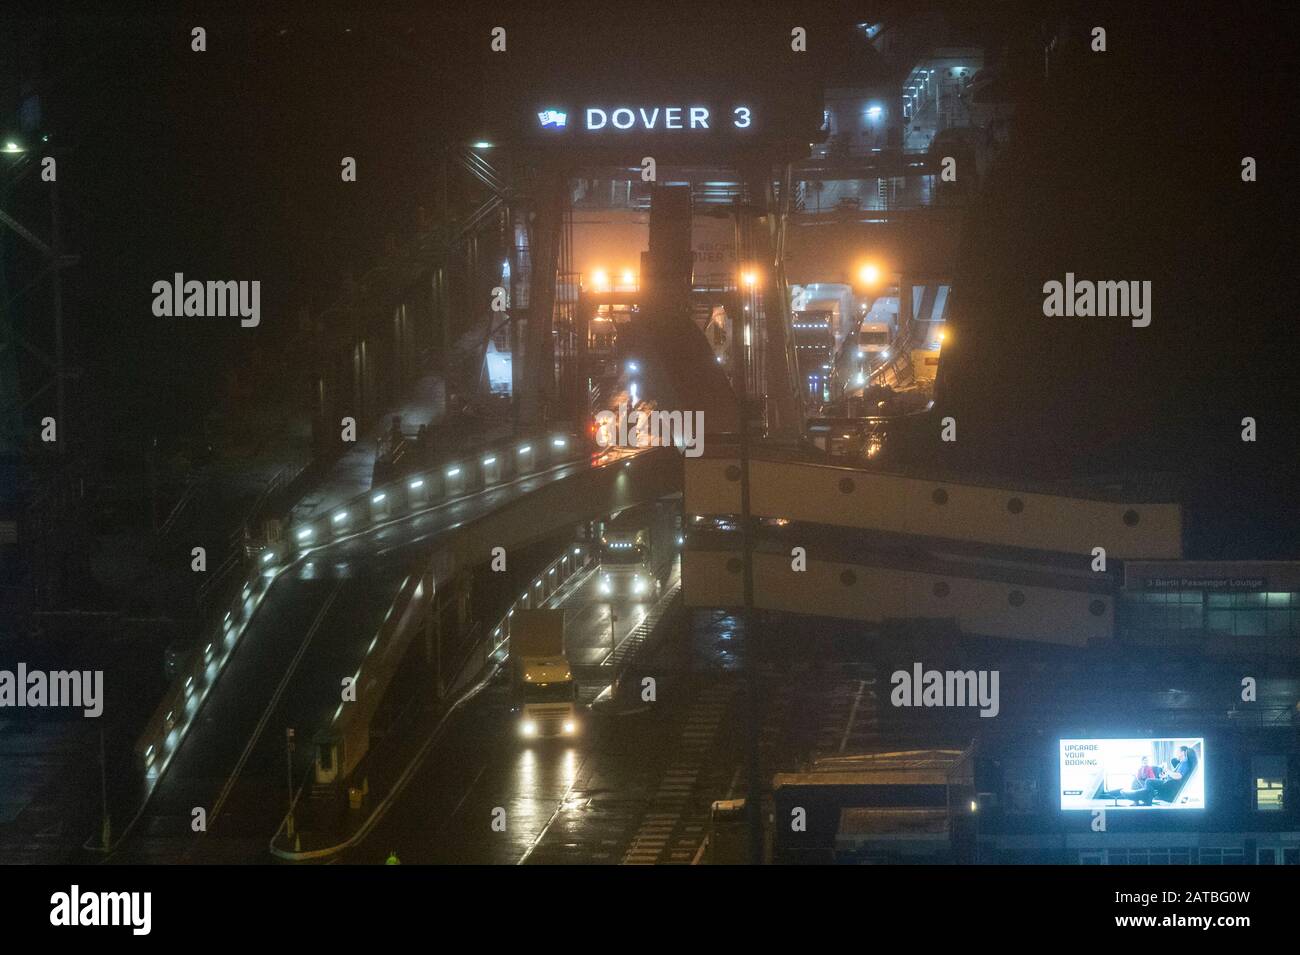 Dover, Britain. 31st Jan, 2020. The first ferryboat arrives at Port of Dover on the first day after Brexit in Dover, Britain, Jan. 31, 2020. Britain officially left the European Union (EU) at 11 p.m. (2300 GMT) Friday, putting an end to its 47-year-long membership of the world's largest trading bloc. Credit: Ray Tang/Xinhua/Alamy Live News Stock Photo